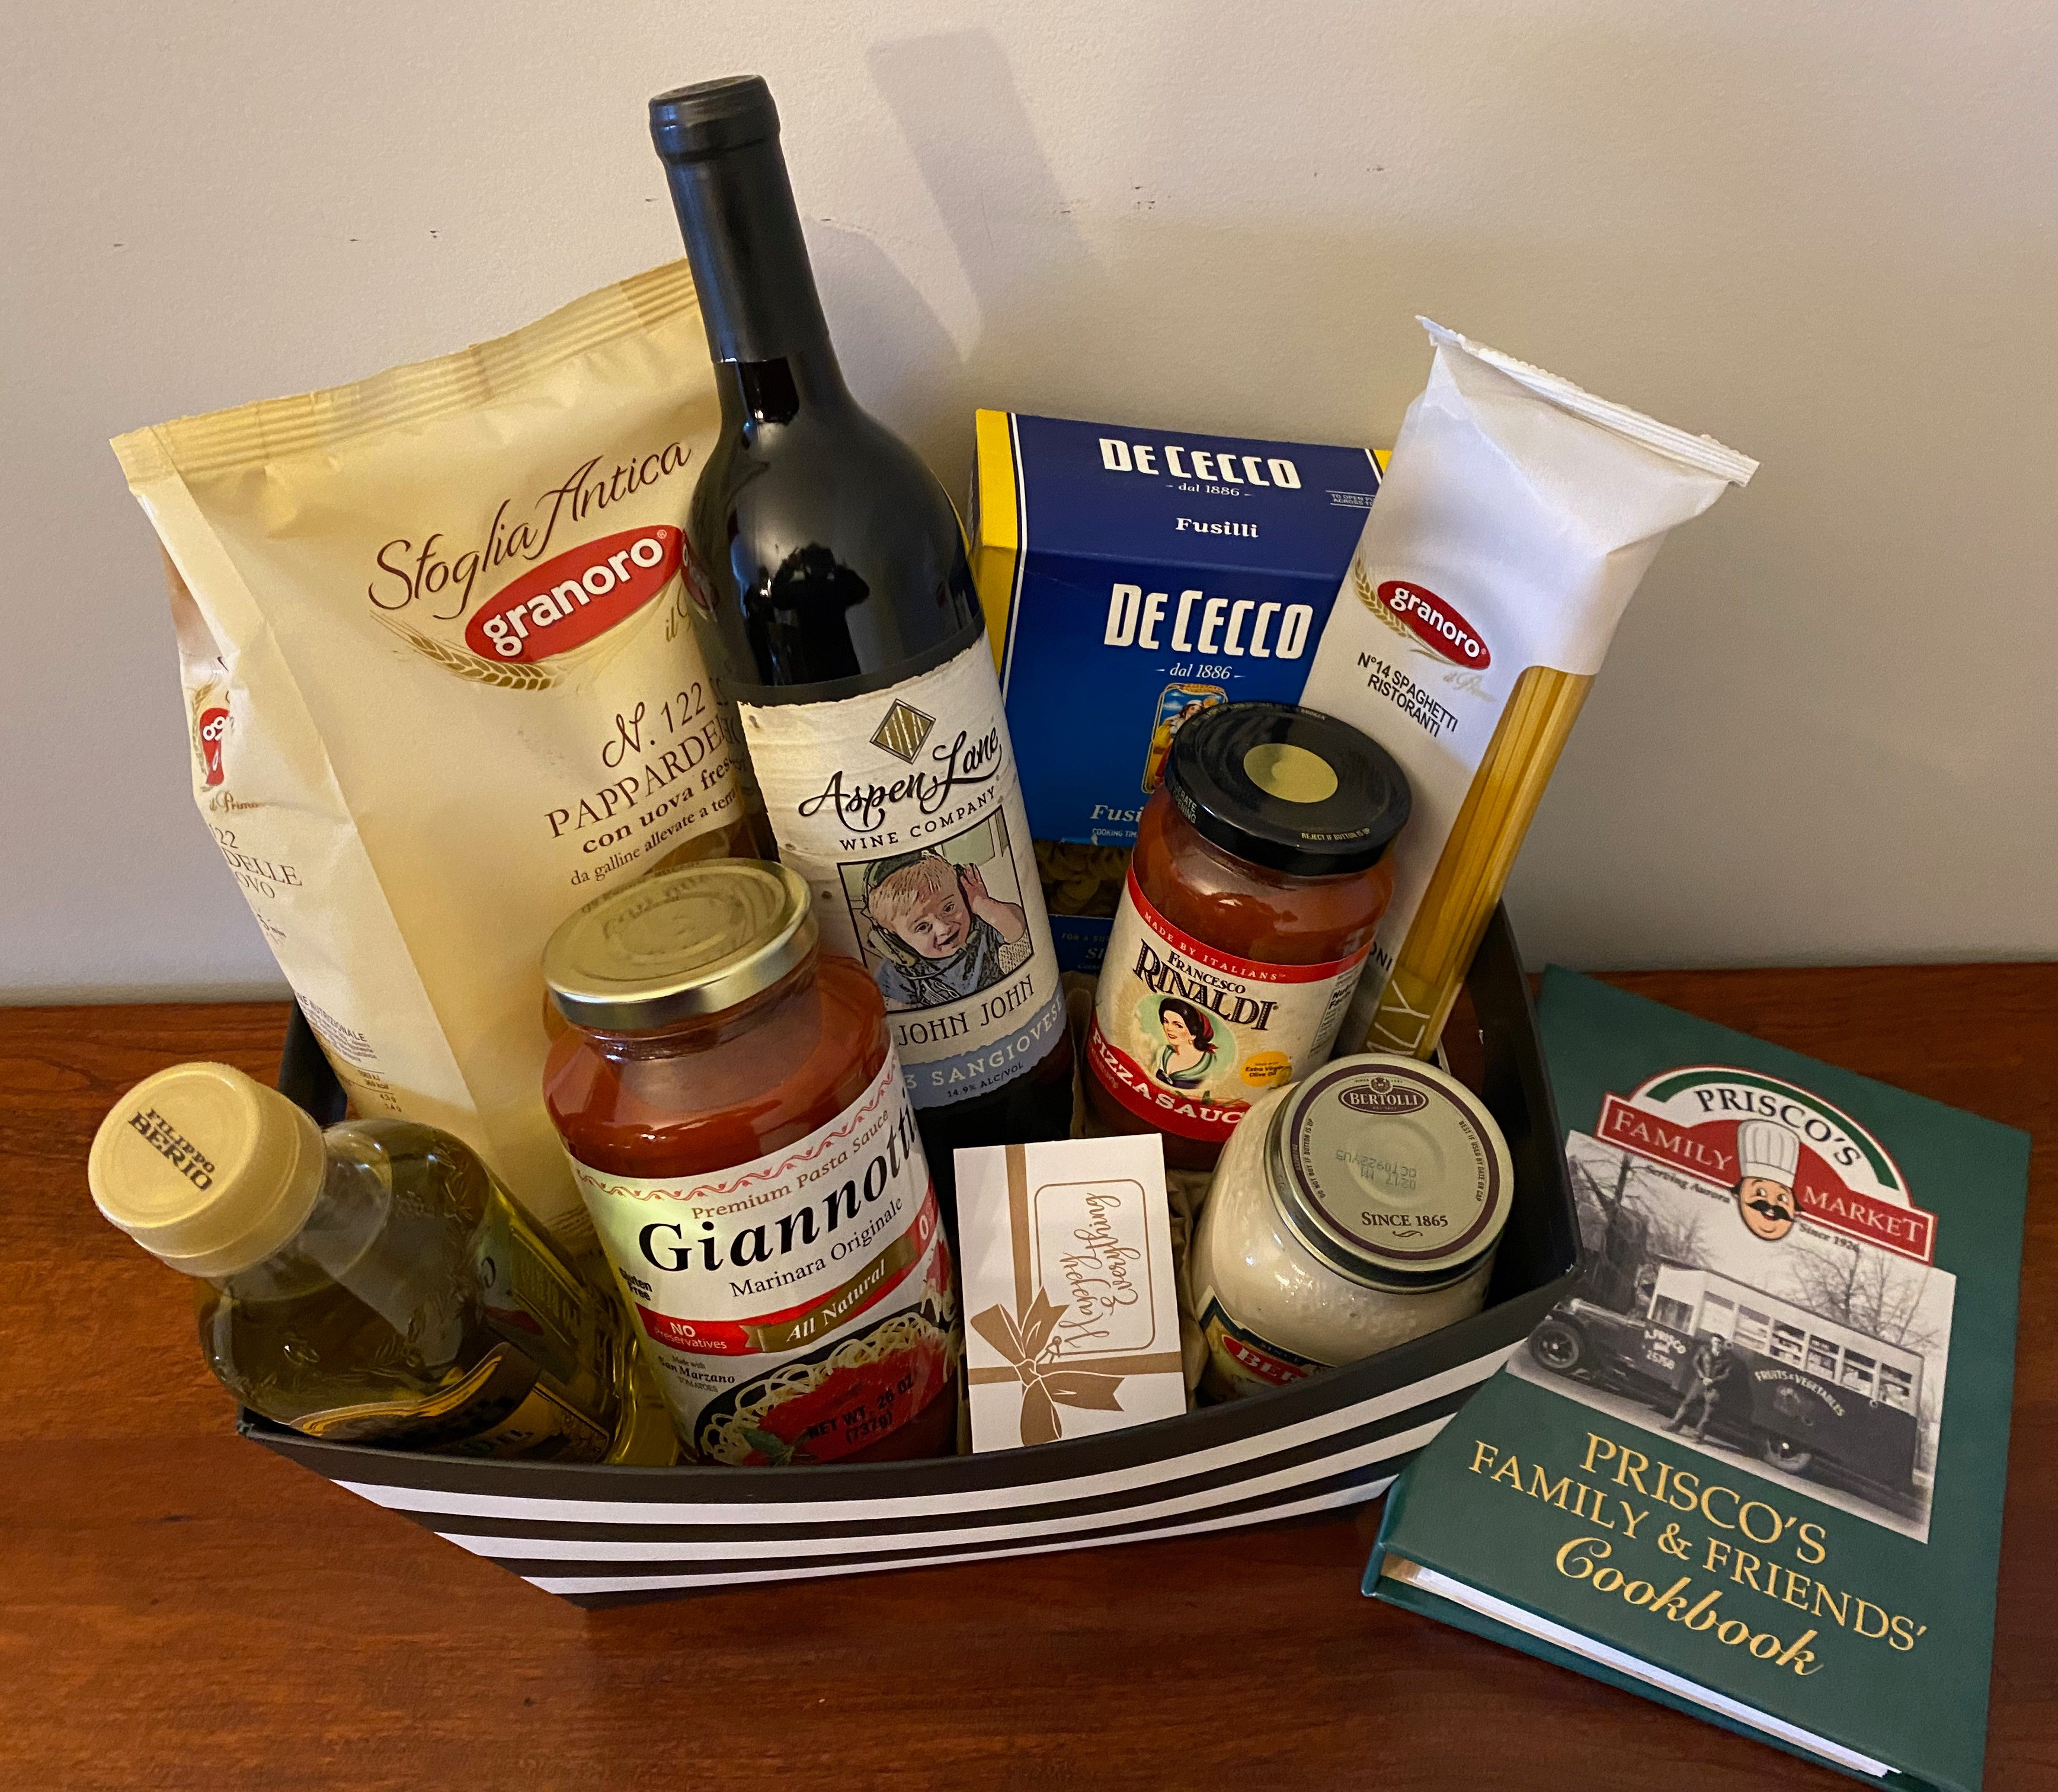 Everything you need to make a pasta dish, plus a $100 gift card in this amazing Prisco's Gift Basket - pastas and sauces, a cookbook and wine.